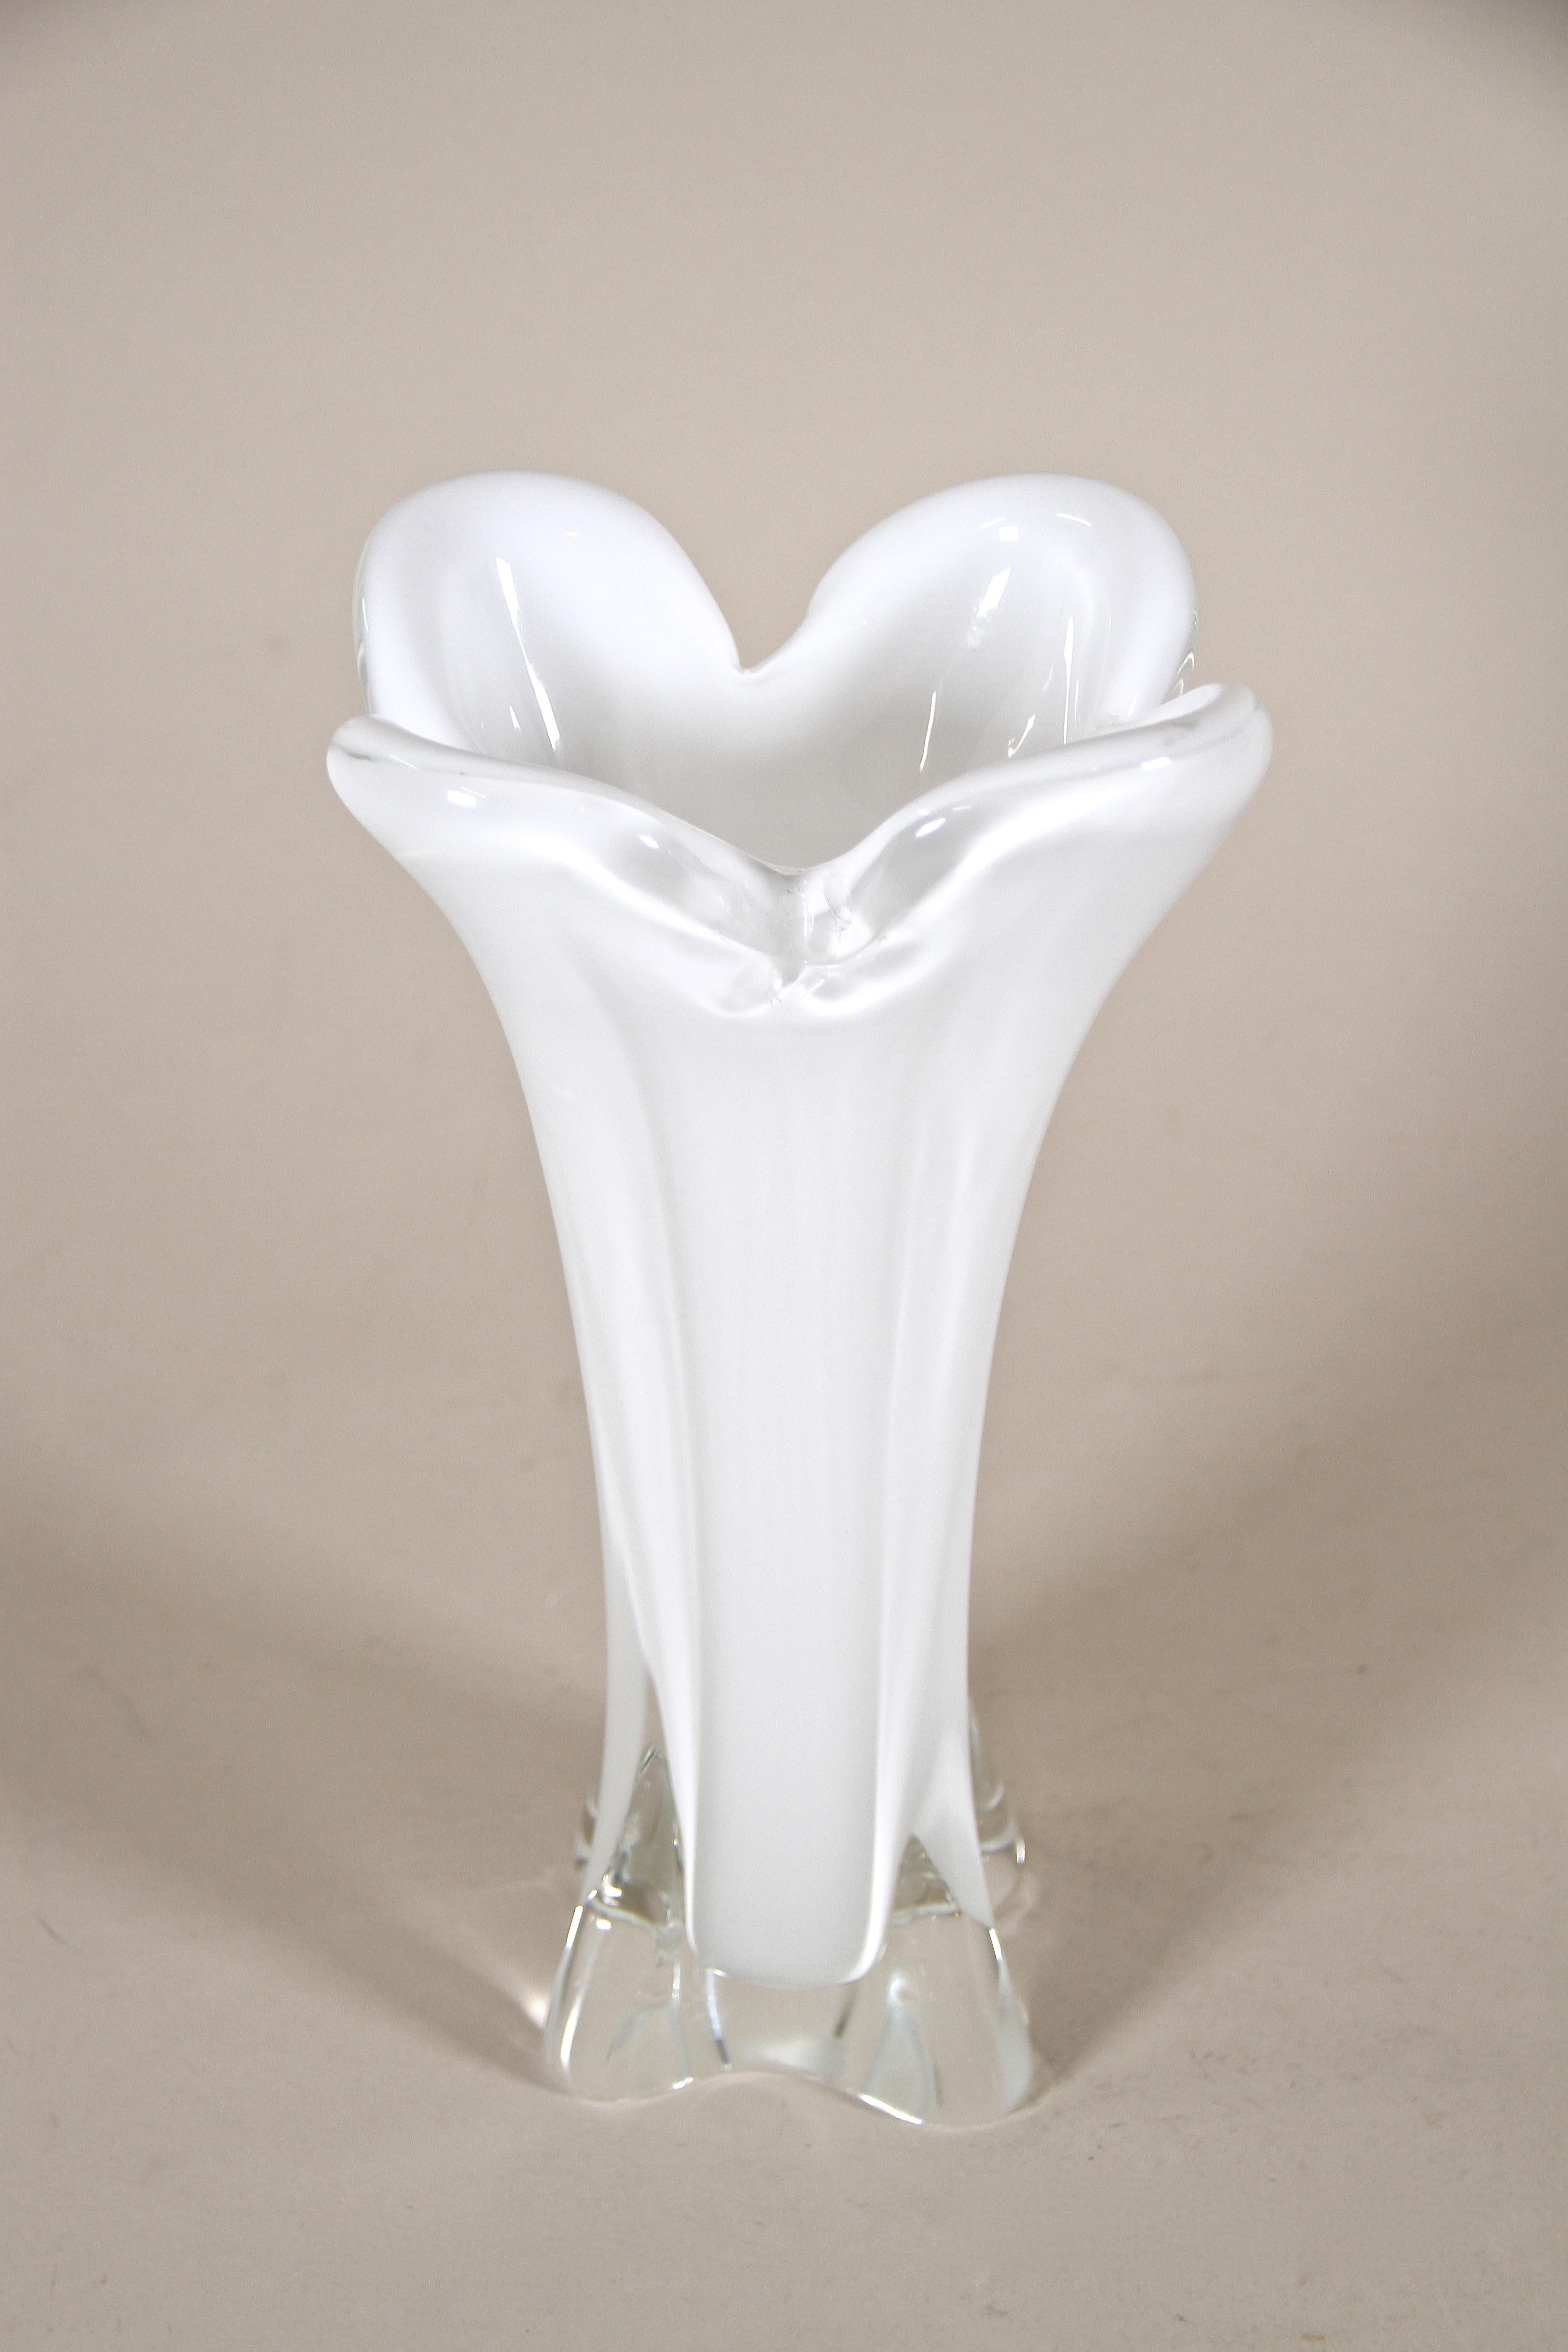 Artfully designed white Murano glass vase from the famous glass art workshops in Italy. Made in the mid century period around 1960 this unique shaped glass vase impresses with its beautiful flashed glass technique in a timeless white tone. The